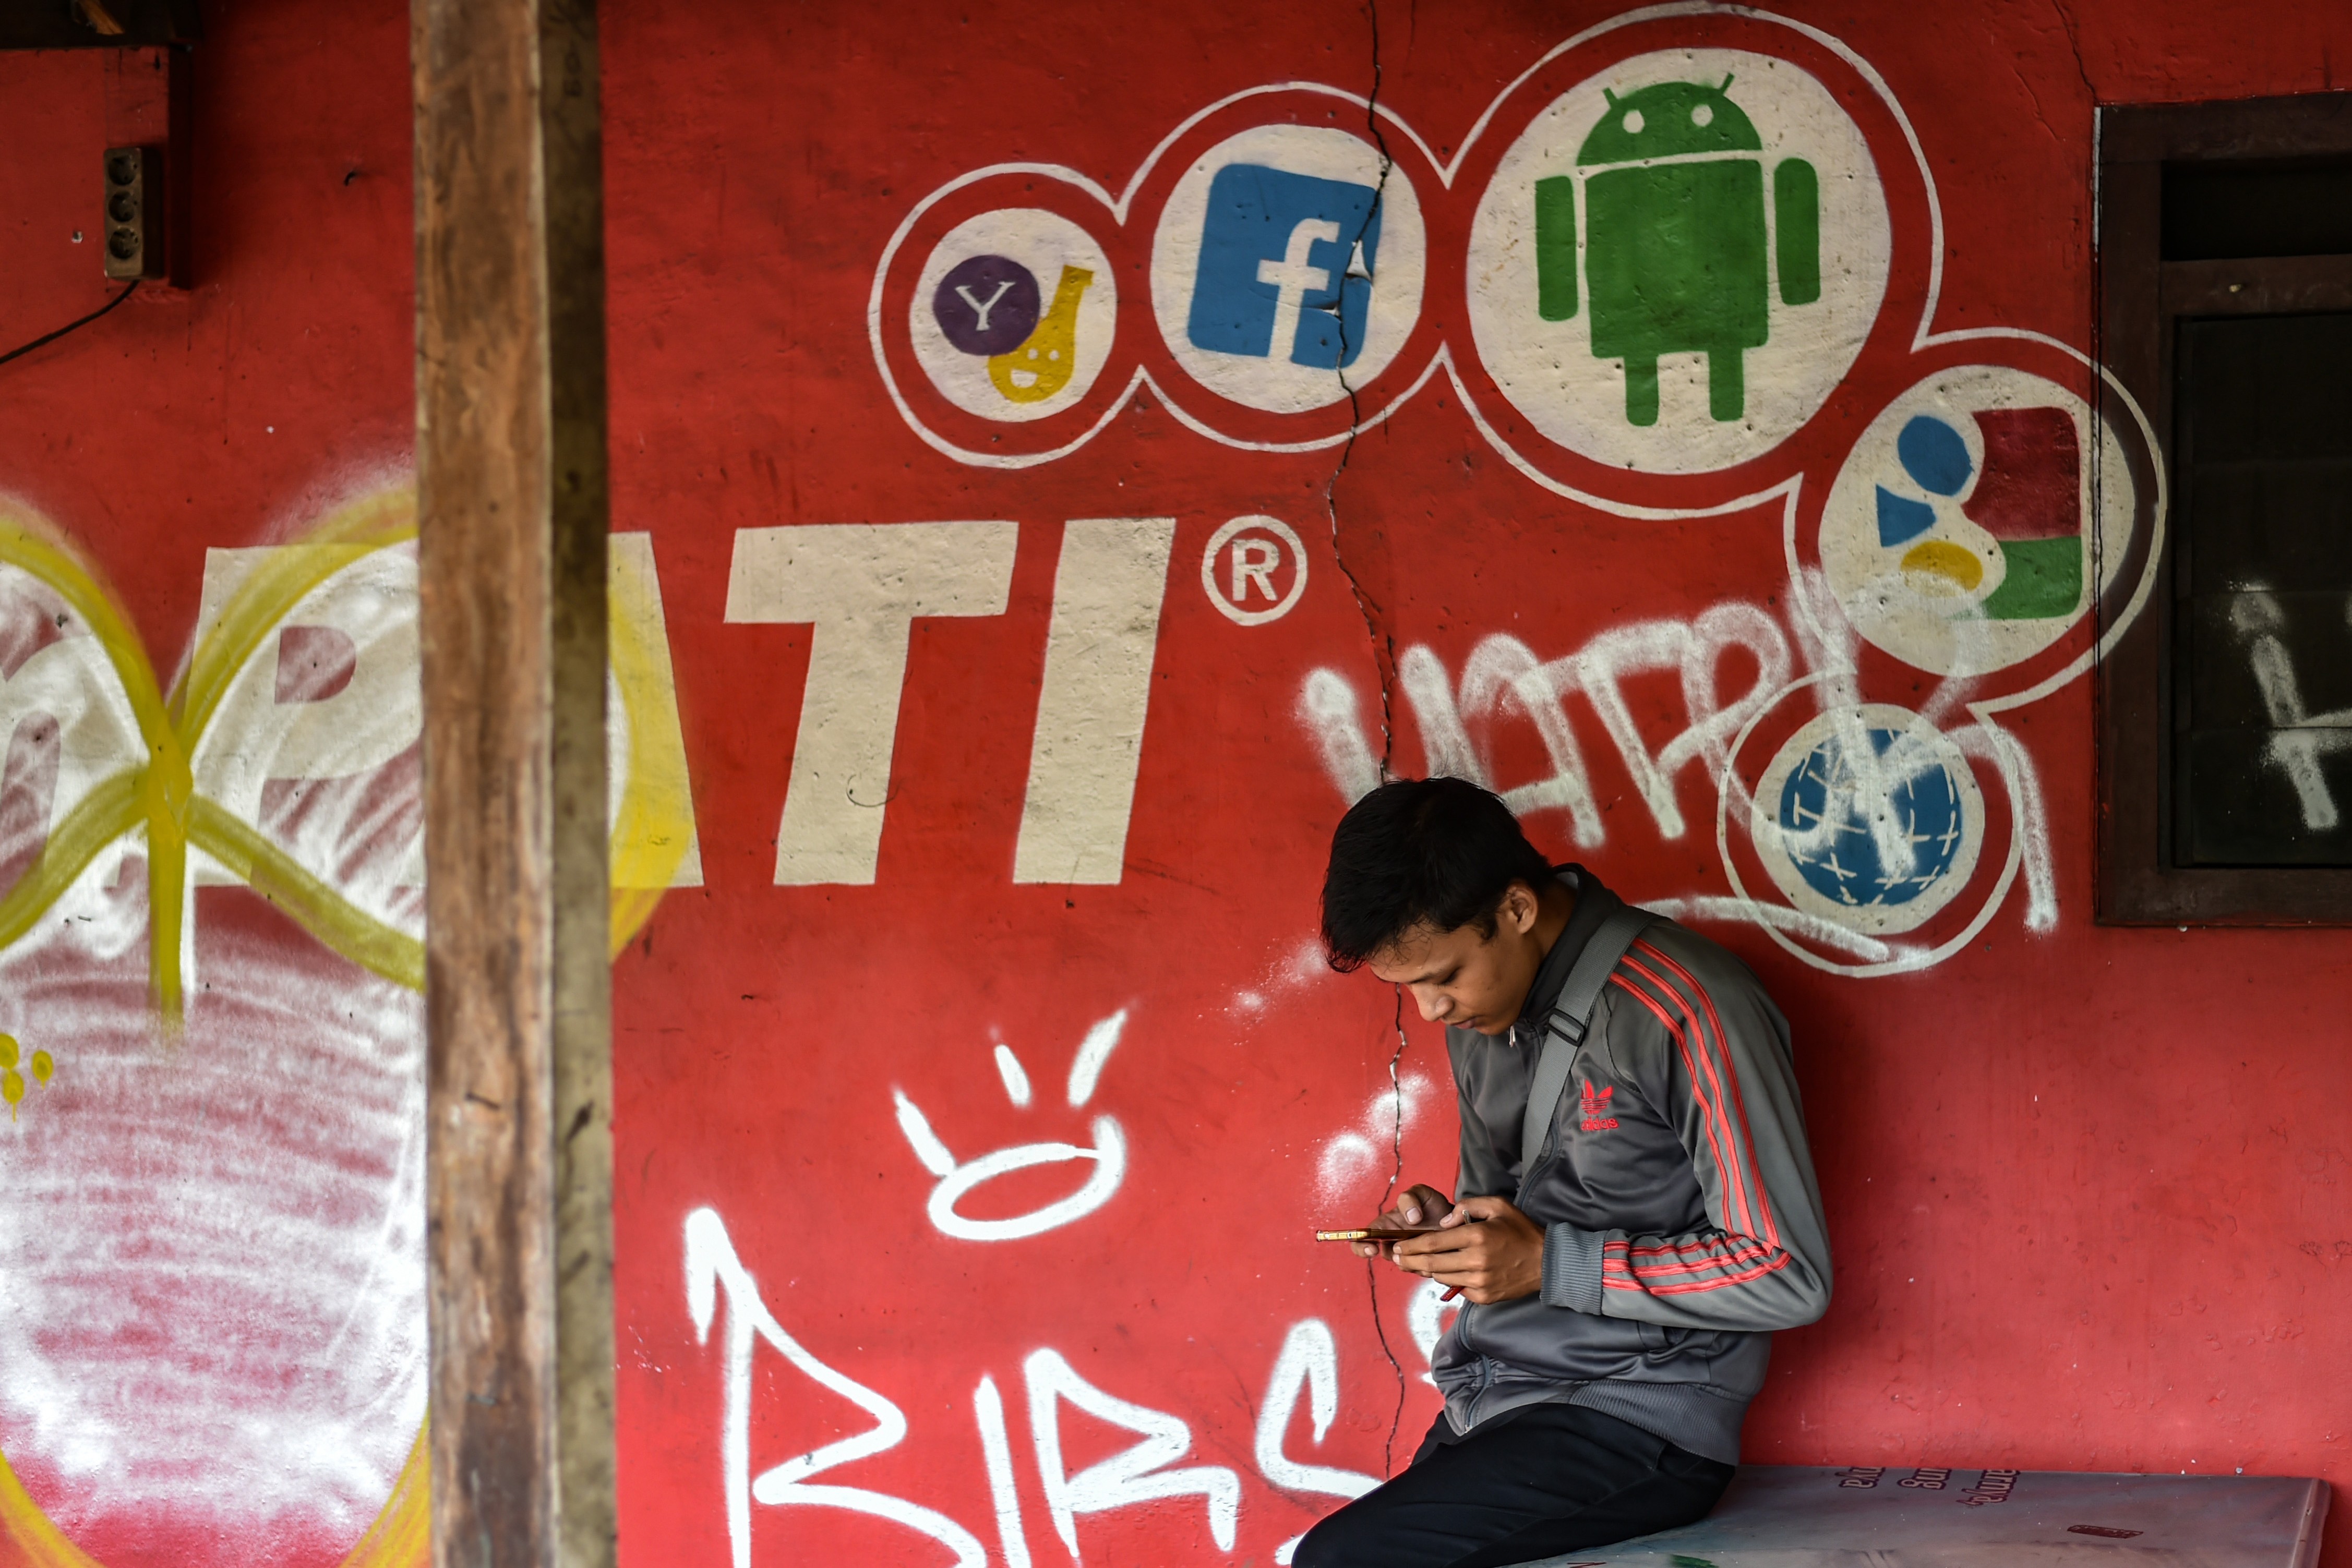 A man uses his phone in front of a mobile service provider’s advertisement in Jakarta, Indonesia, in March. Governments in Southeast Asia have ambitious road maps to tap the benefits of the digital economy but have also rushed to regulate it. Photo: AFP